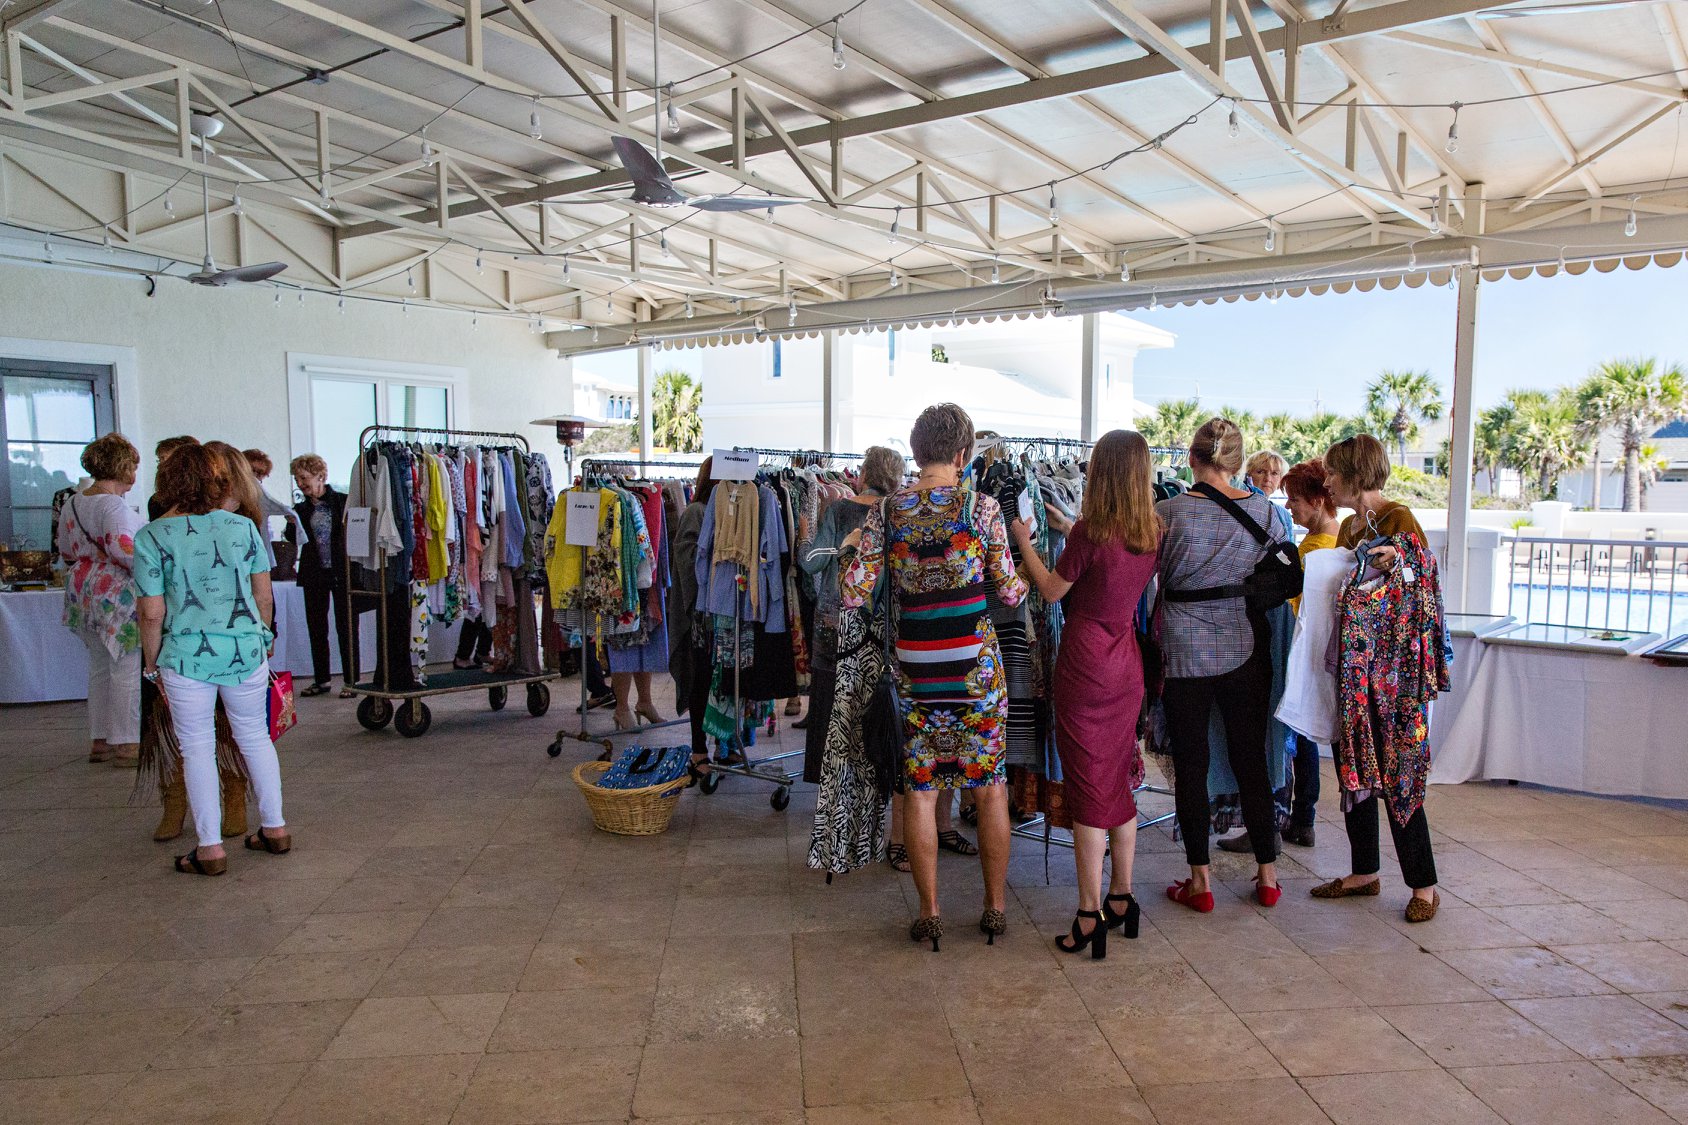 Caring & Sharing of South Walton to hold its 12th Annual Fashion Show